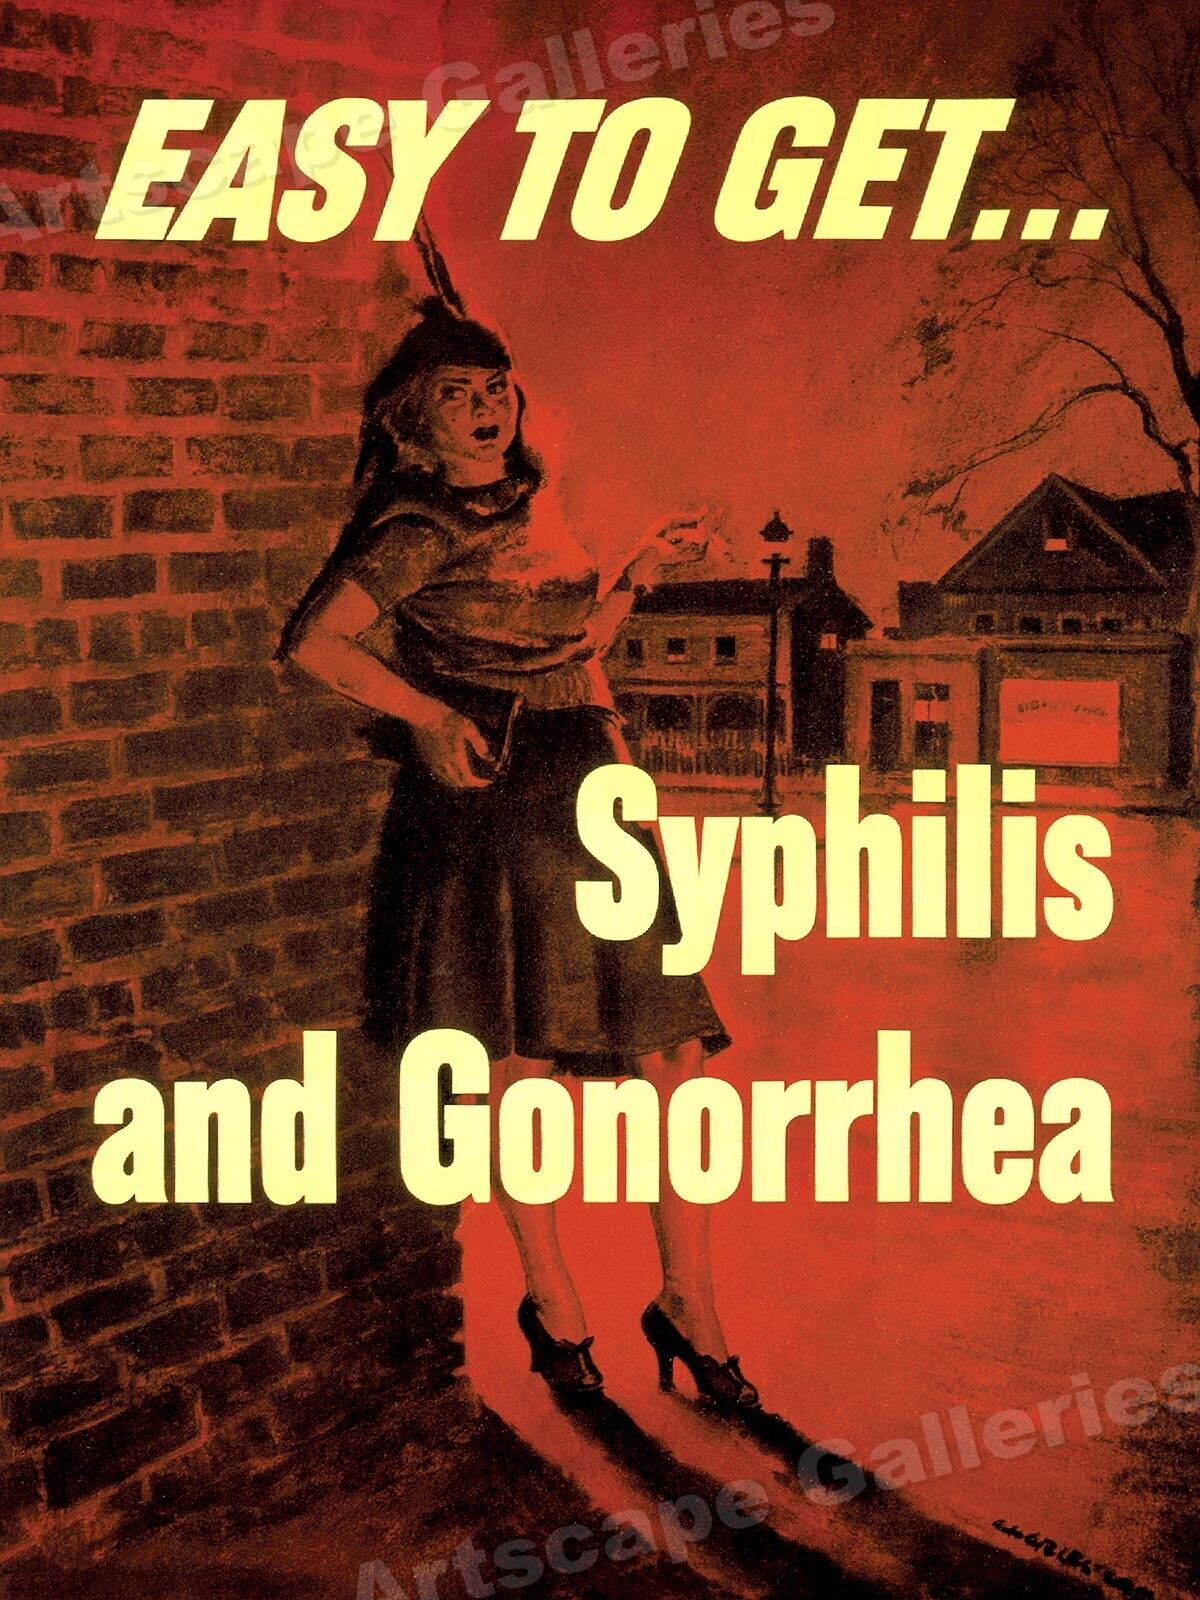 Easy To Get Syphilis and Gonorrhea -  1940s WW2 Army VD Health Poster - 18x24